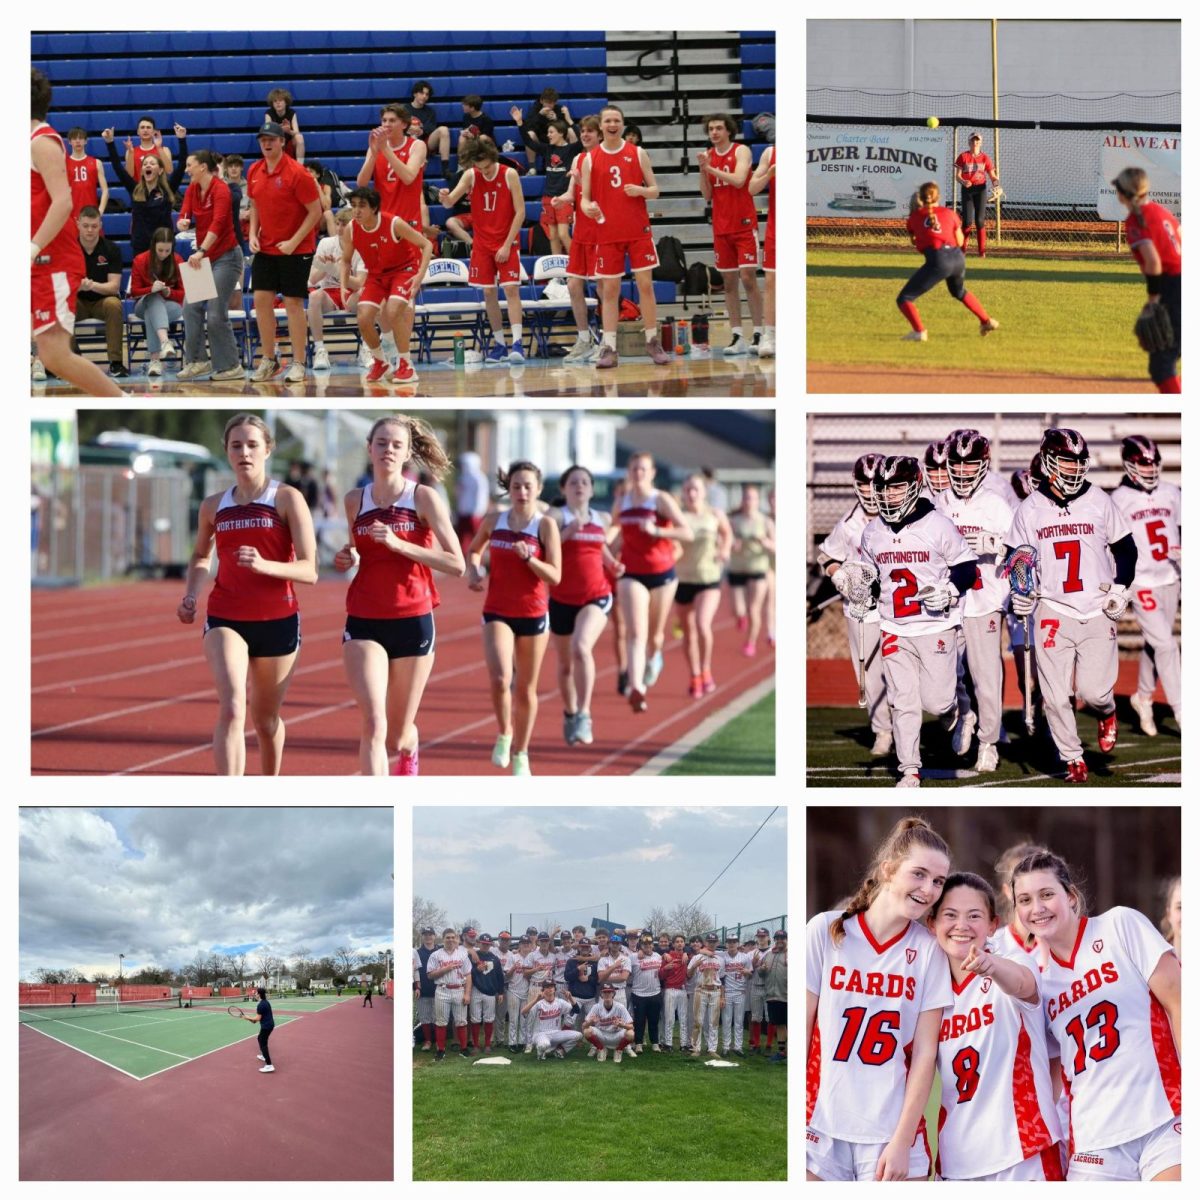 The numerous spring sports in action